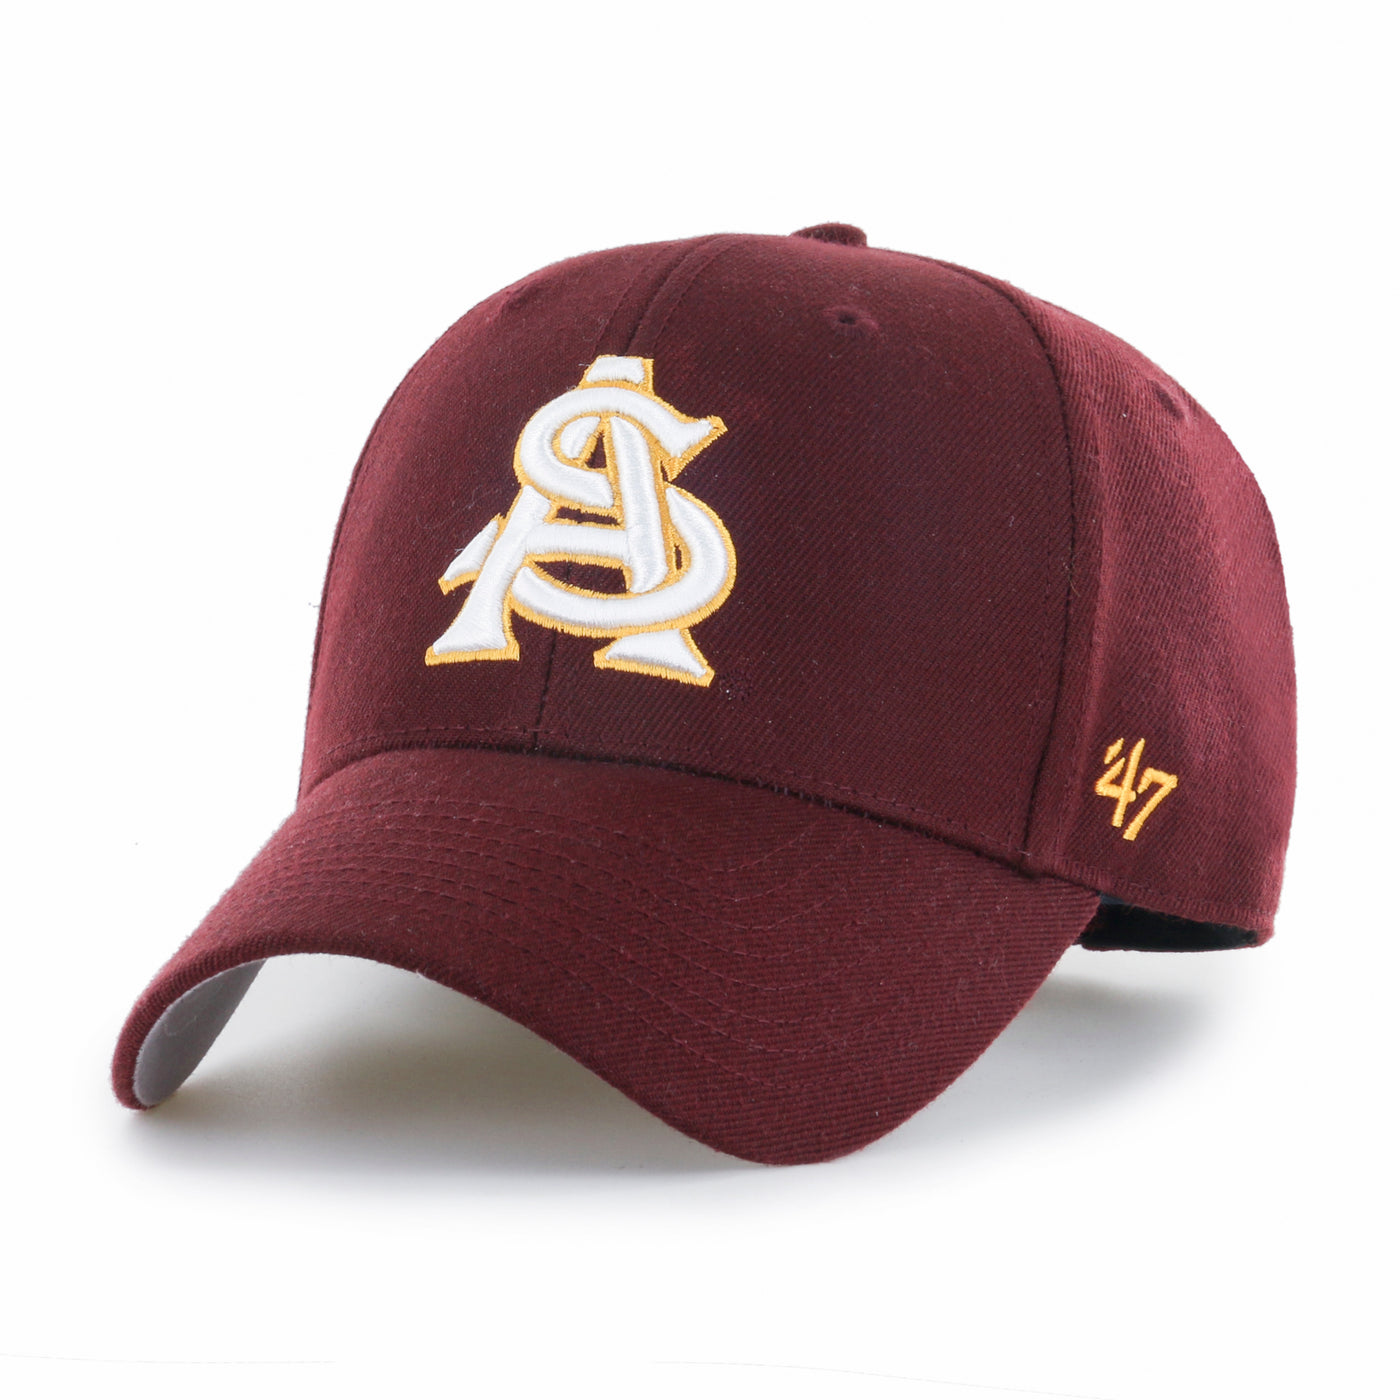 ASU maroon hat from 47Brand with white interlocking 'A' and 'S' embroidered on front